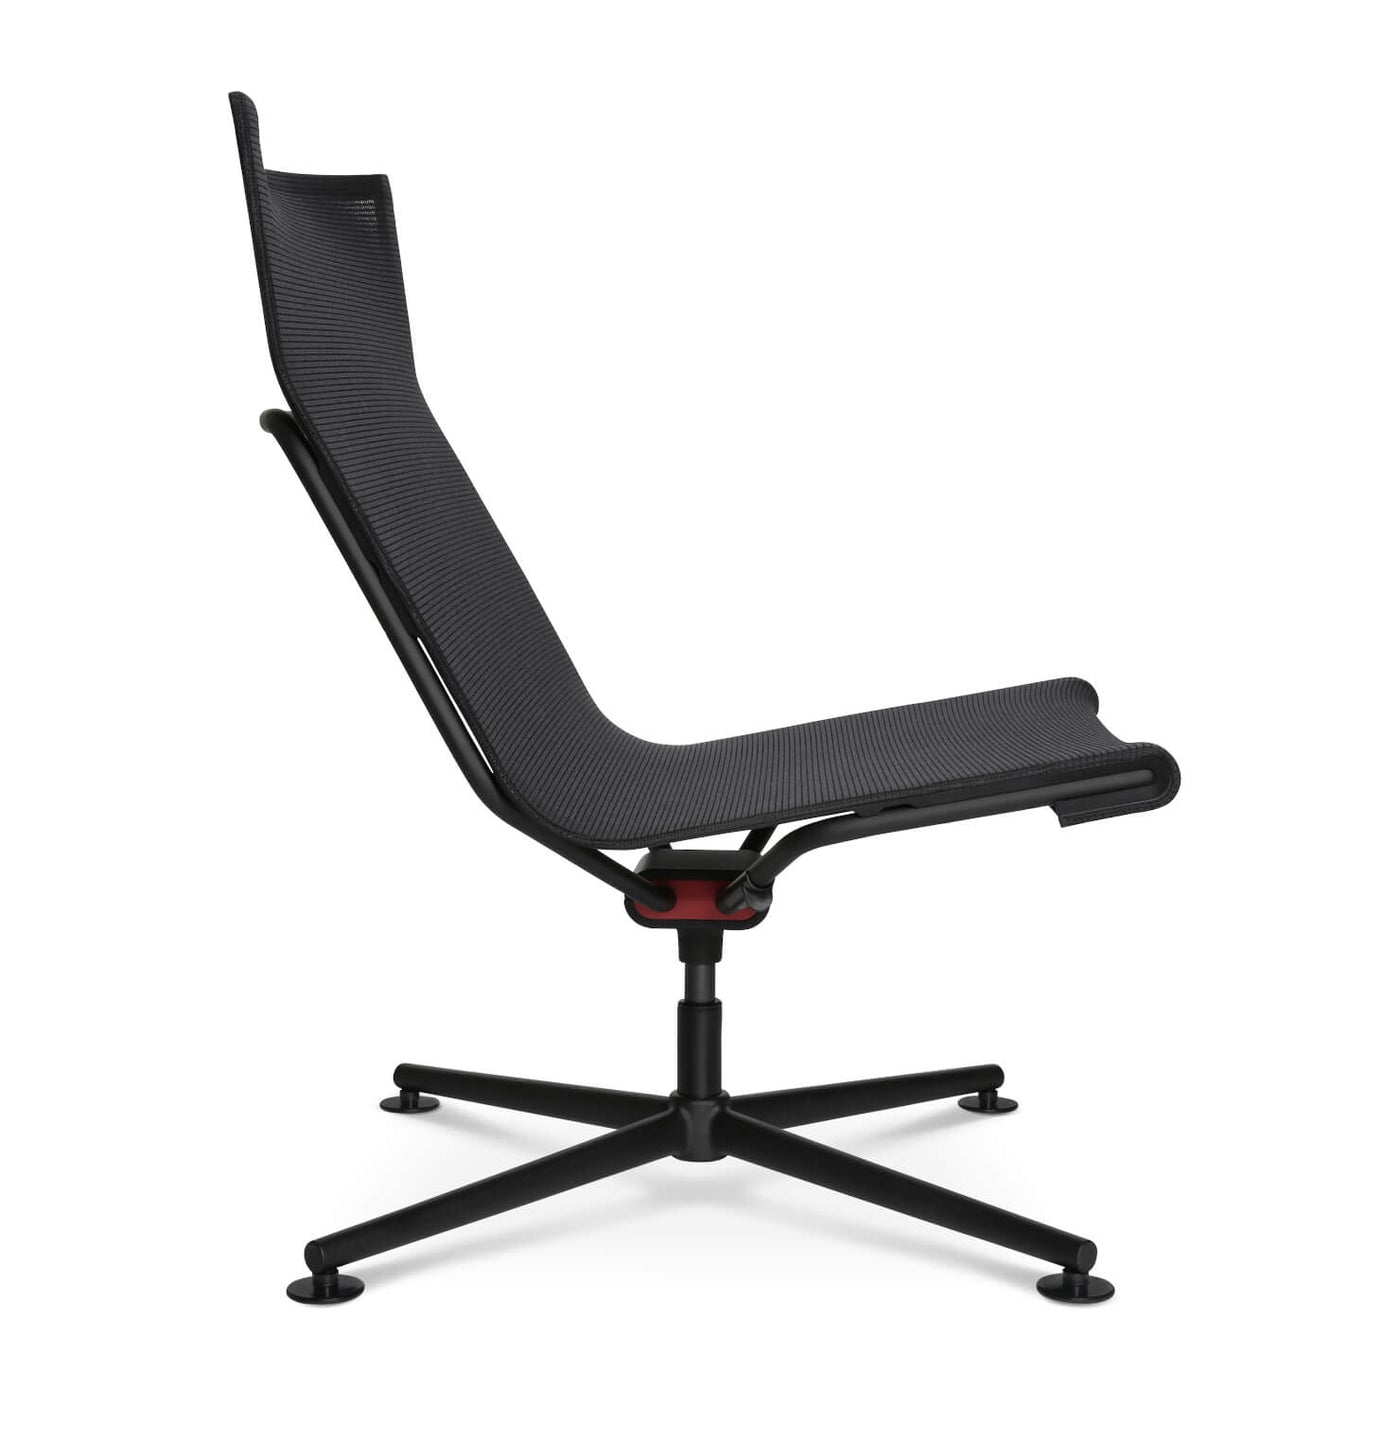 Wagner - D1 Low Lounge in schwarz - OFFICE CHAIRS - 123HomeOffice